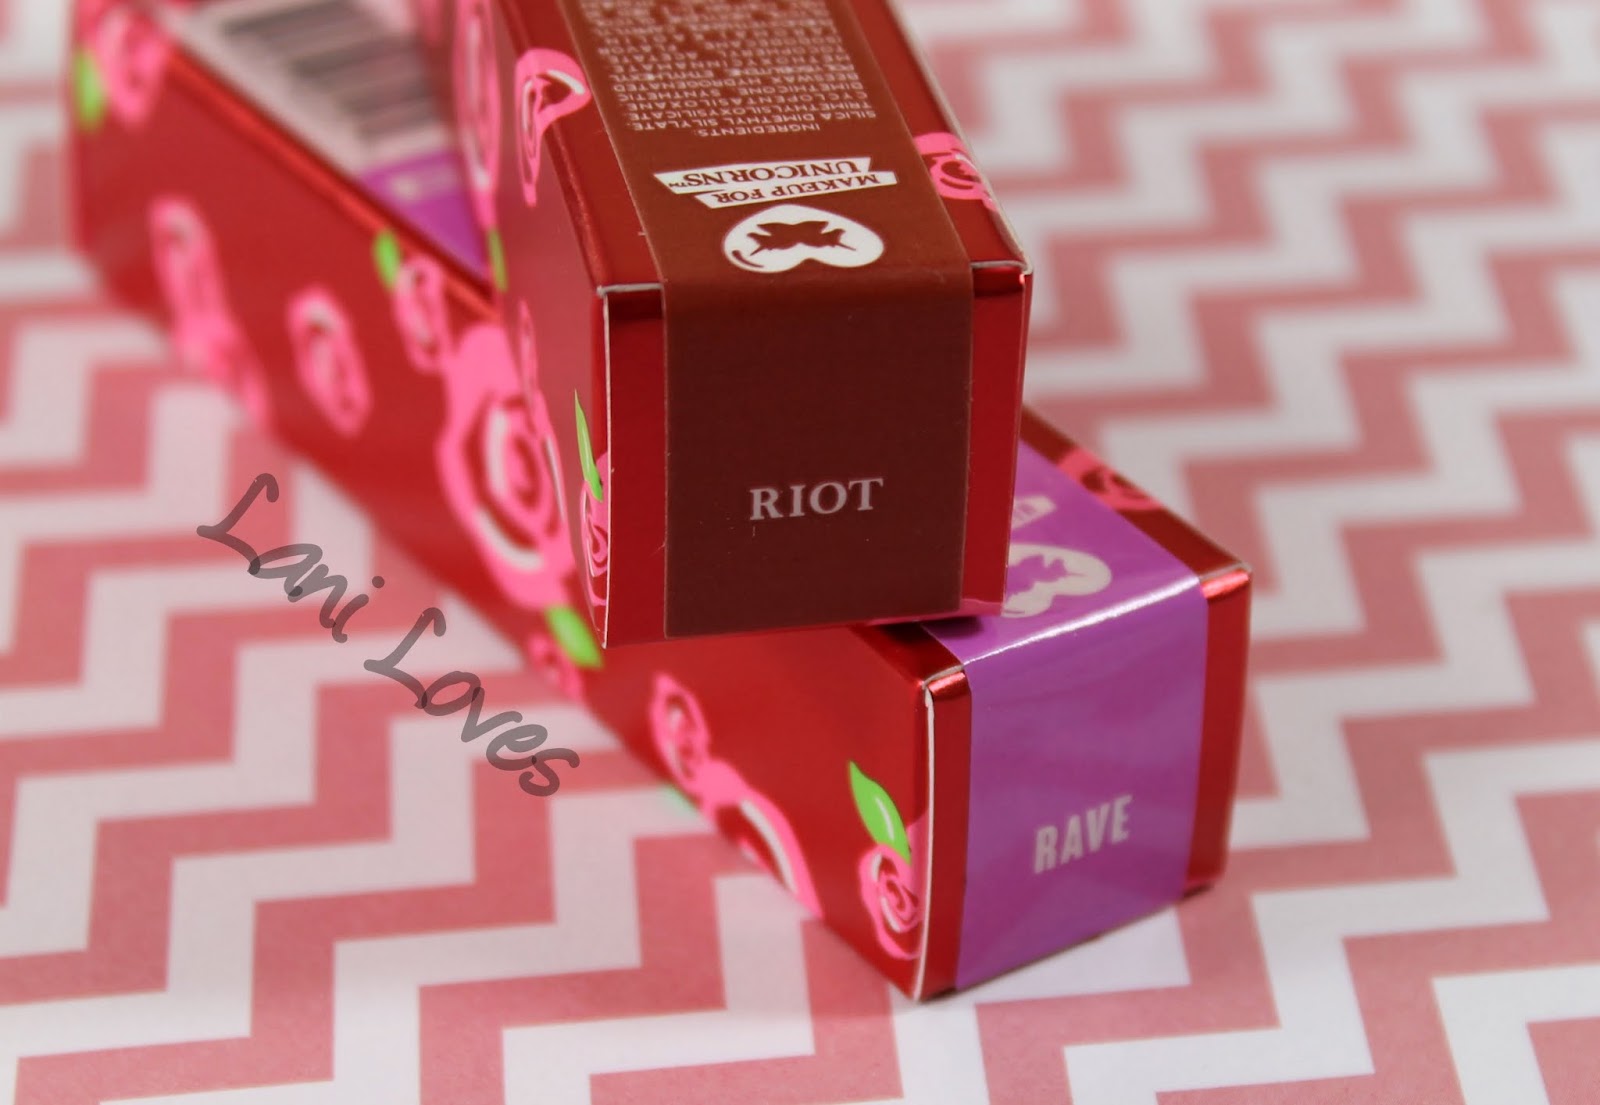 Lime Crime Velvetines - Riot and Rave Swatches & Review